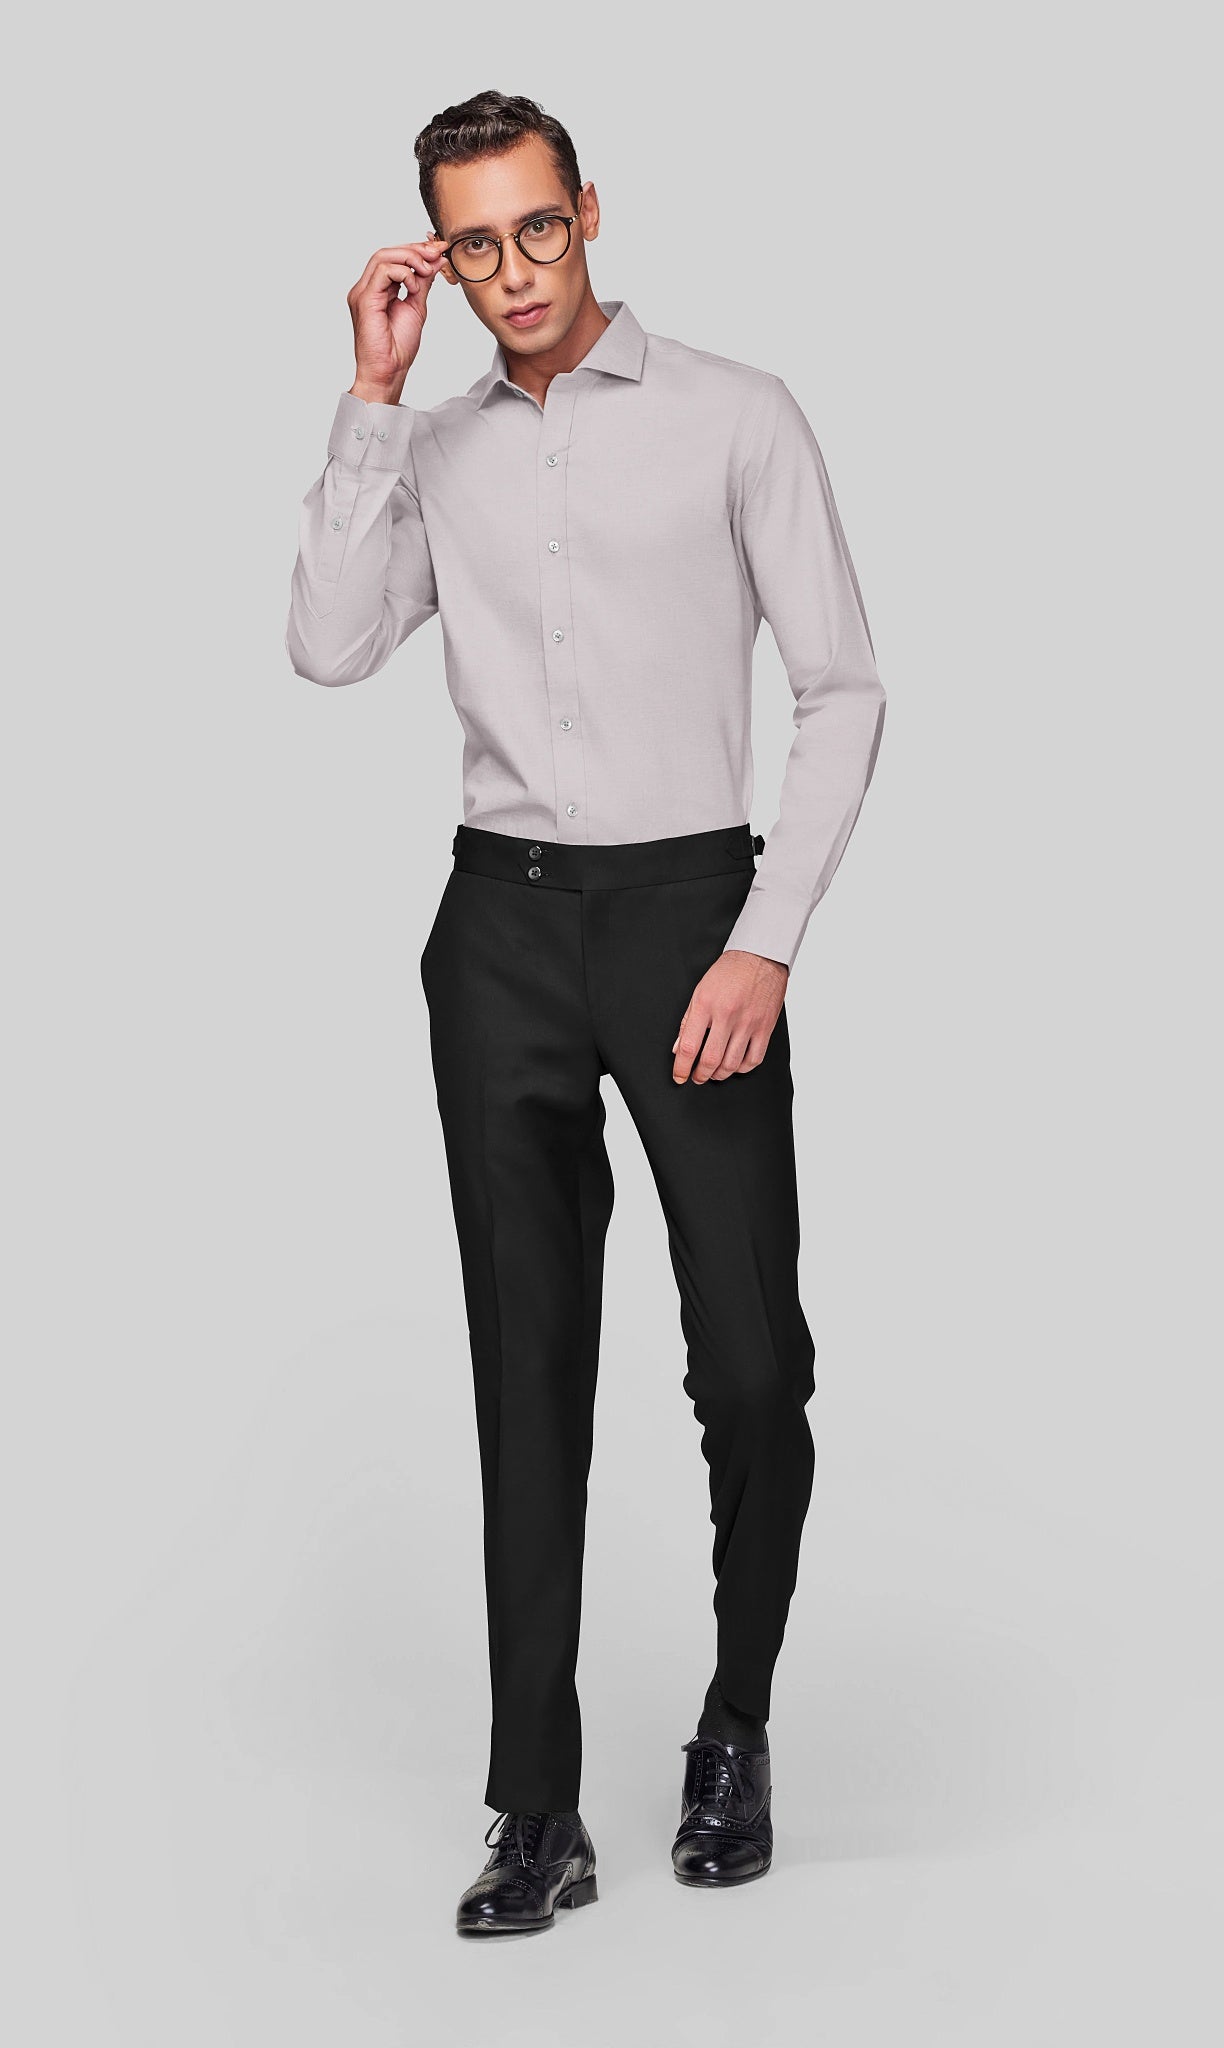 Man Wearing A Grey Shirt And Black Pants Background, Business Casual  Picture, Office, Business Background Image And Wallpaper for Free Download